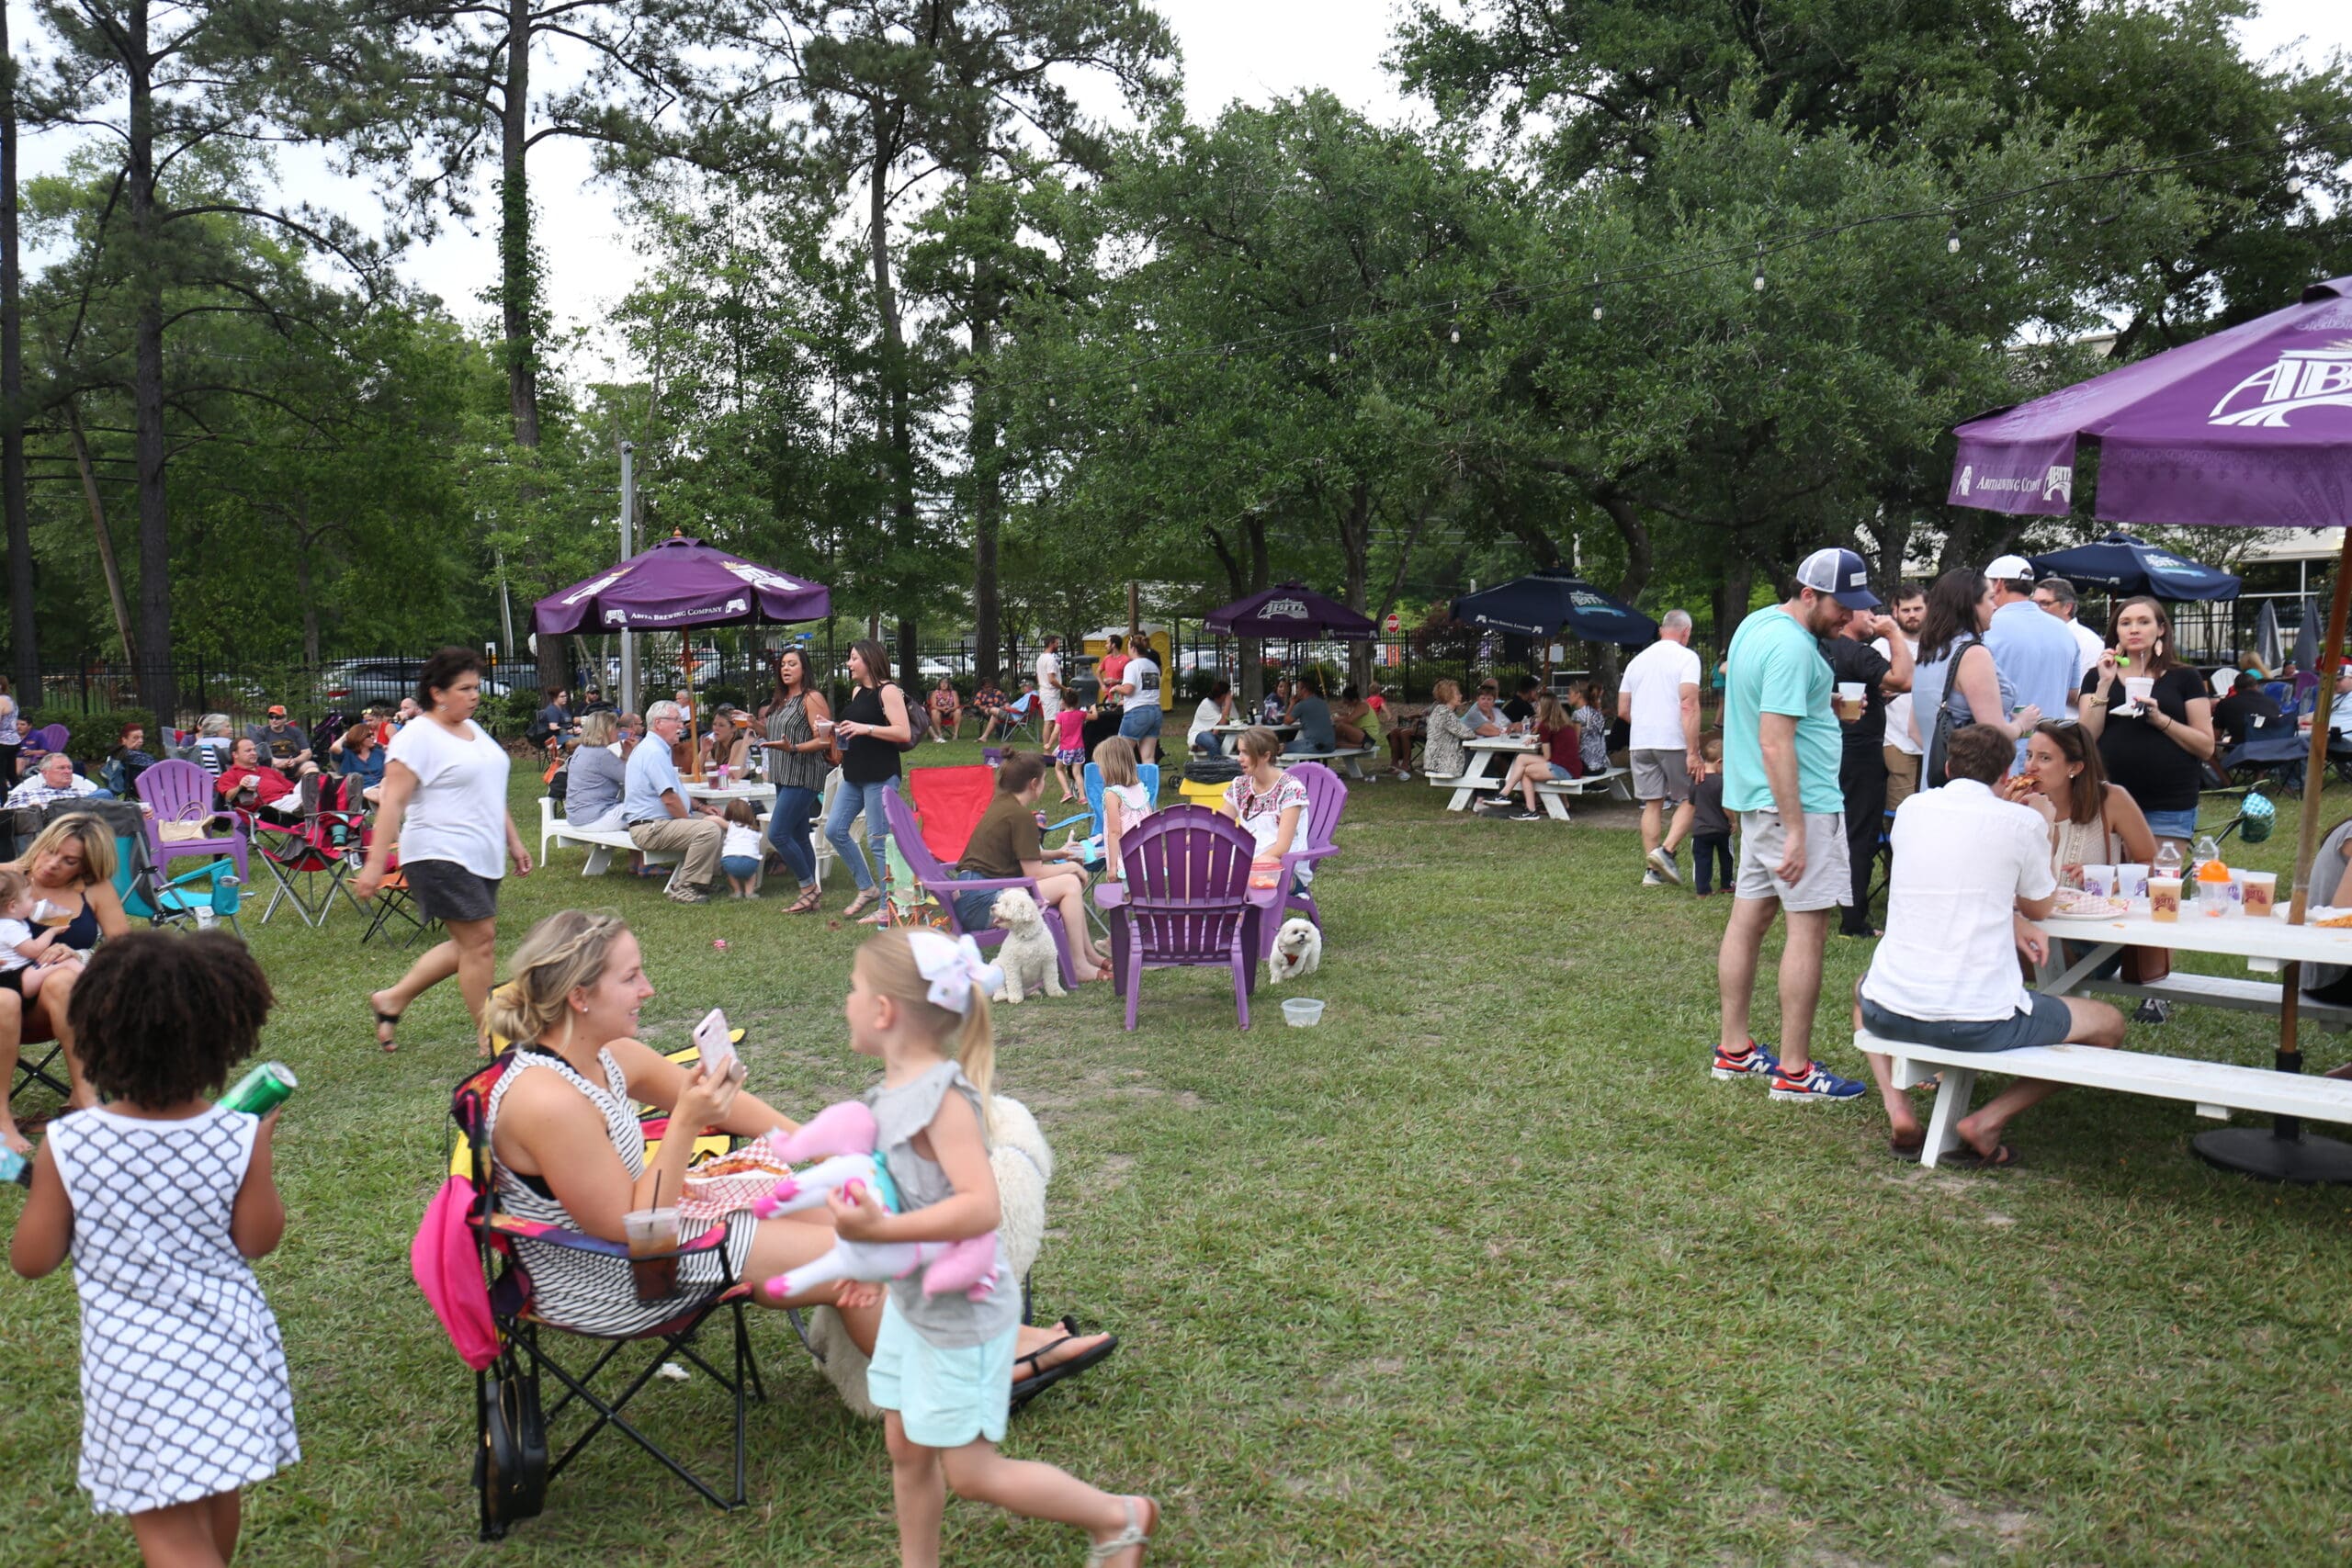 Customers & family members enjoying the outdoors at the monthly food truck round up at abita brewing company.